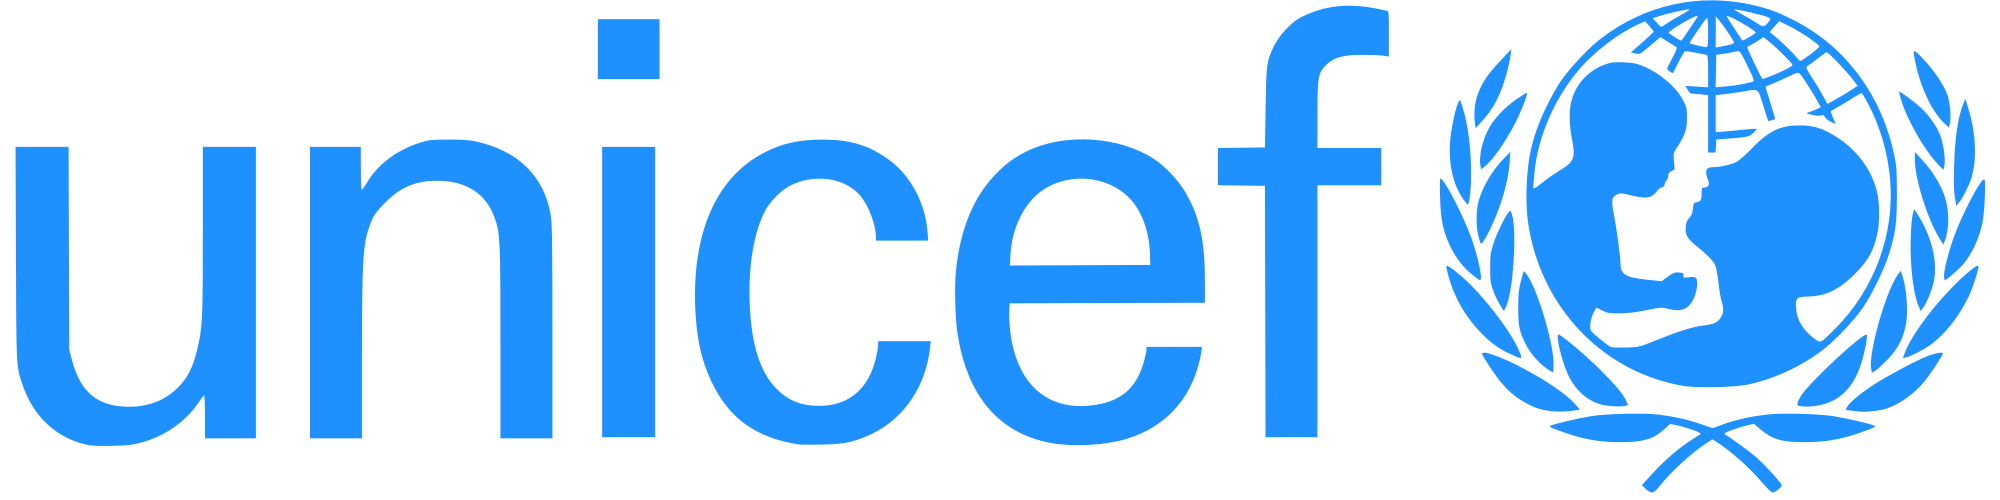 Access Challenge Partners with Unicef